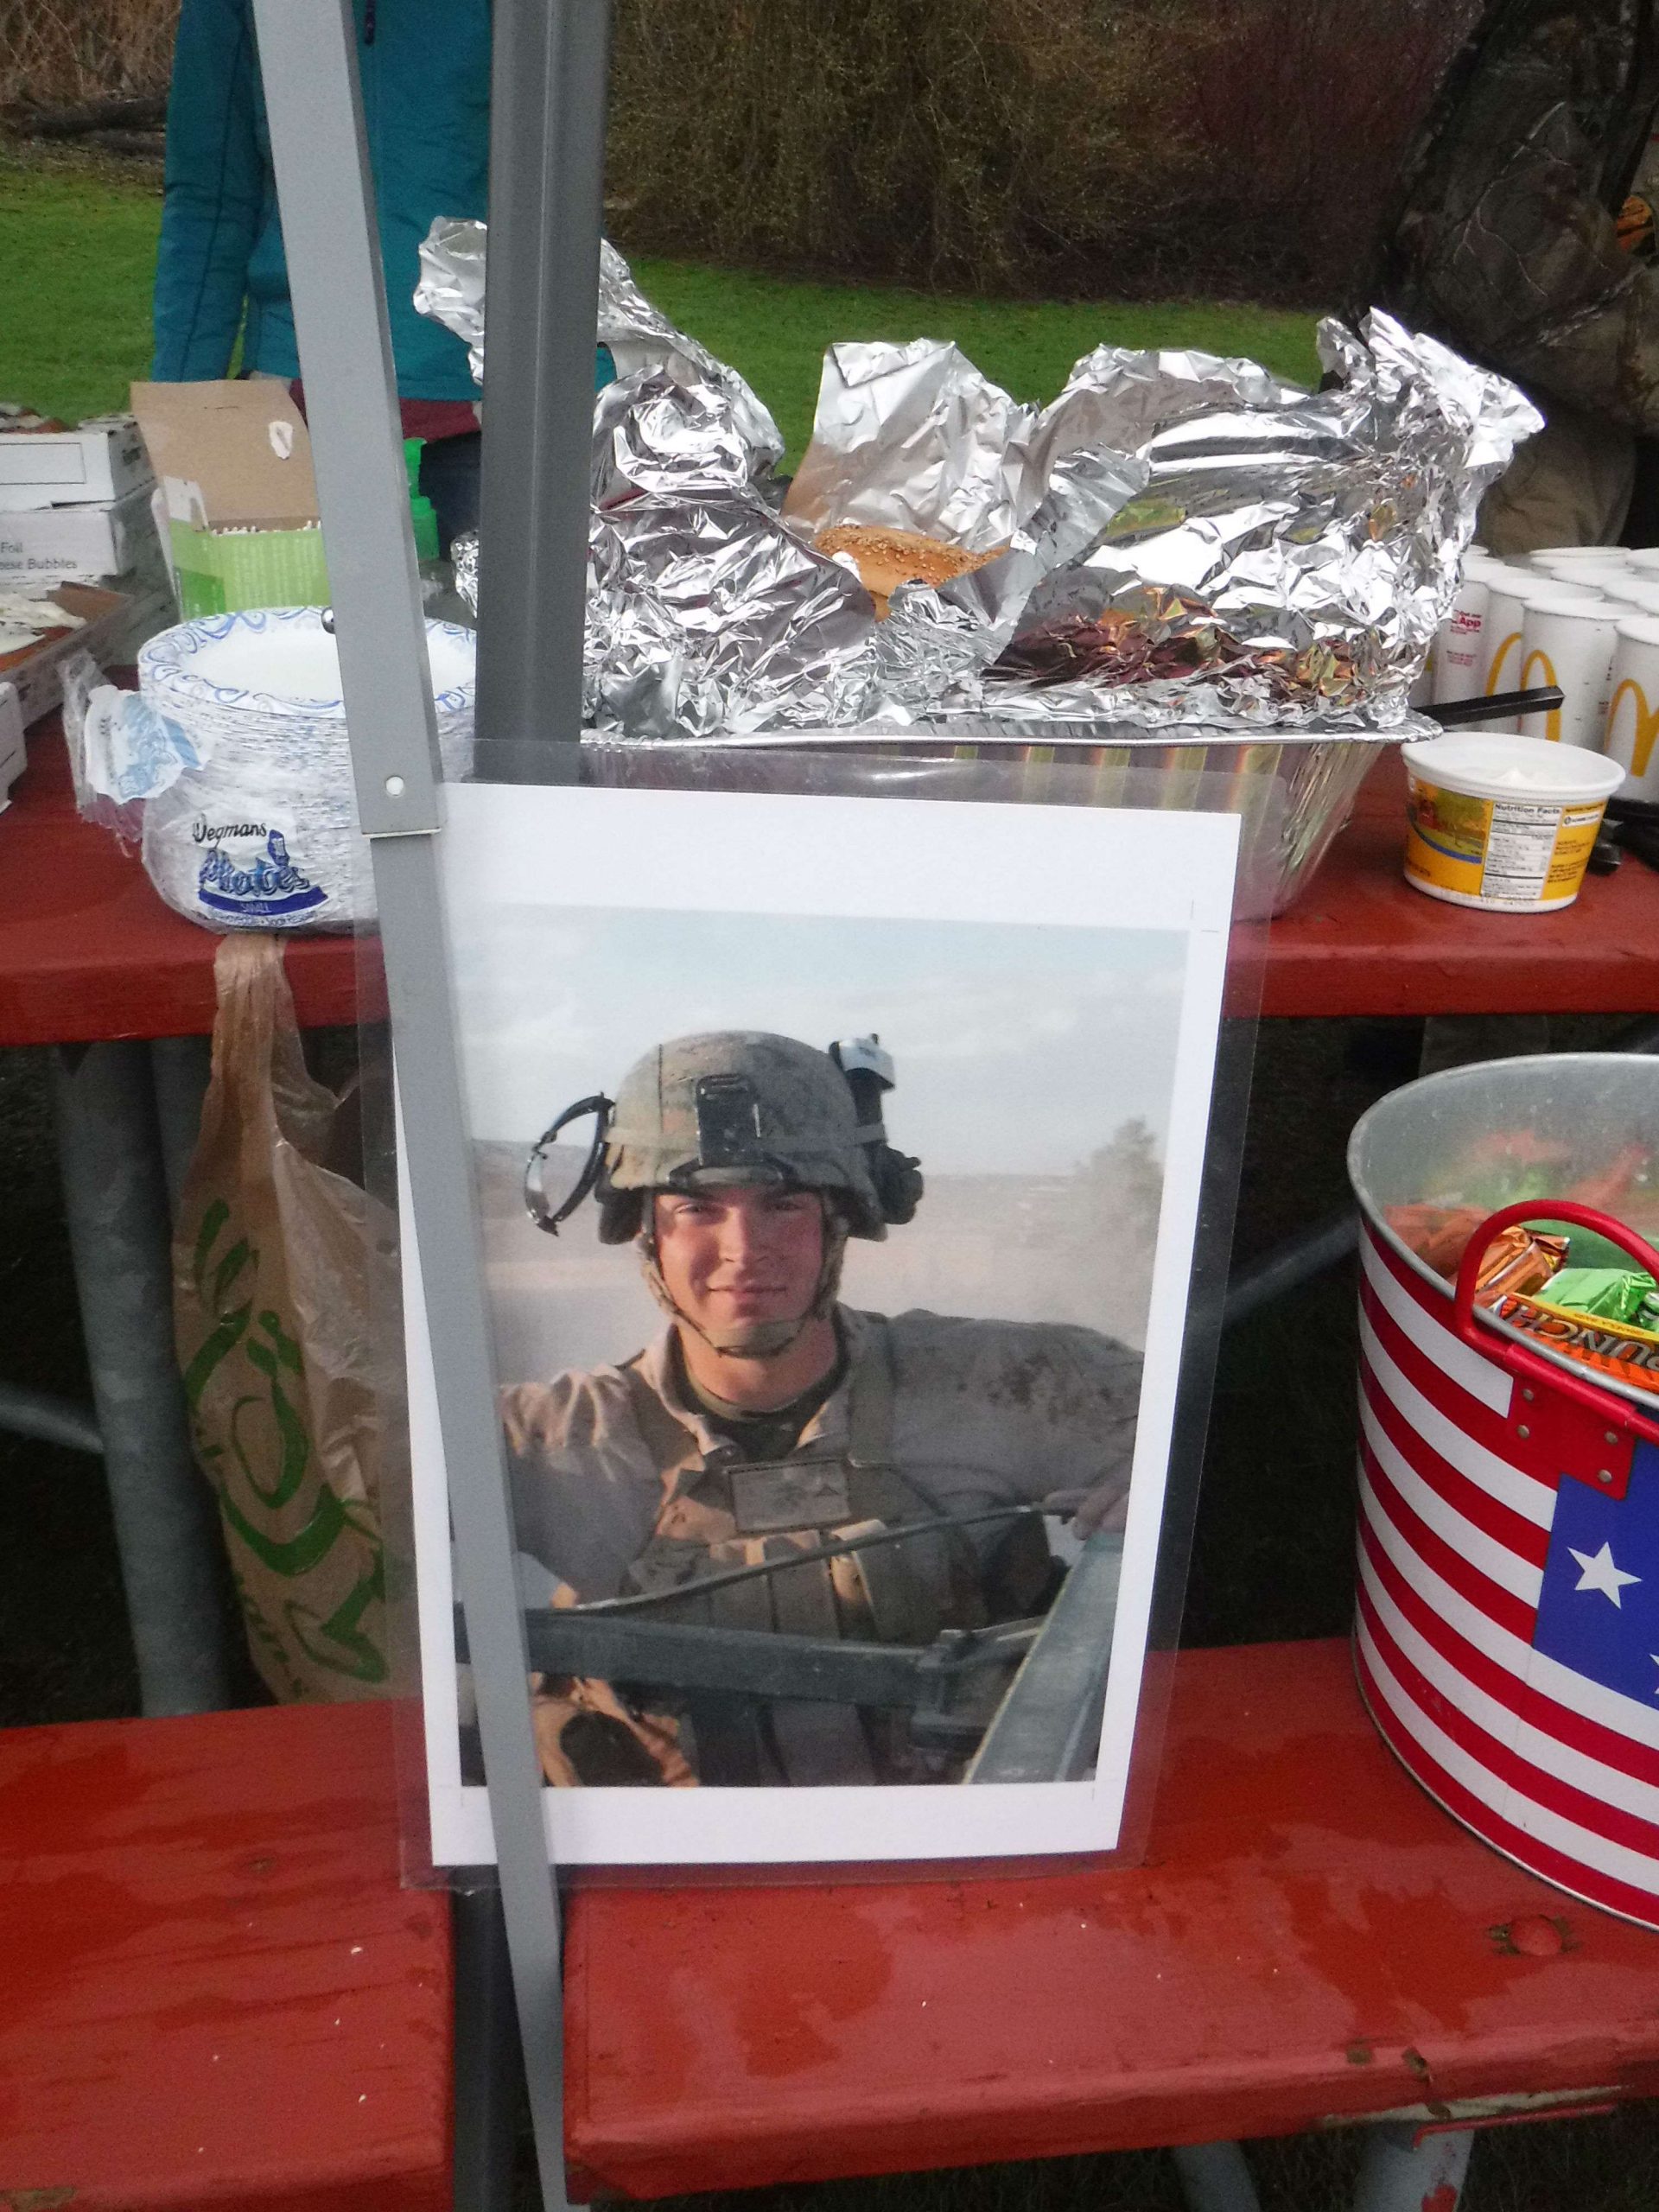  A photo of Cpl. Kyle Schneider. 

<br><br> To learn more about this individual who gave his life for our country and the organization named after him, visit:  
<a href=http://www.cplkyleschneider.com/>www.cplkyleschneider.com</a>